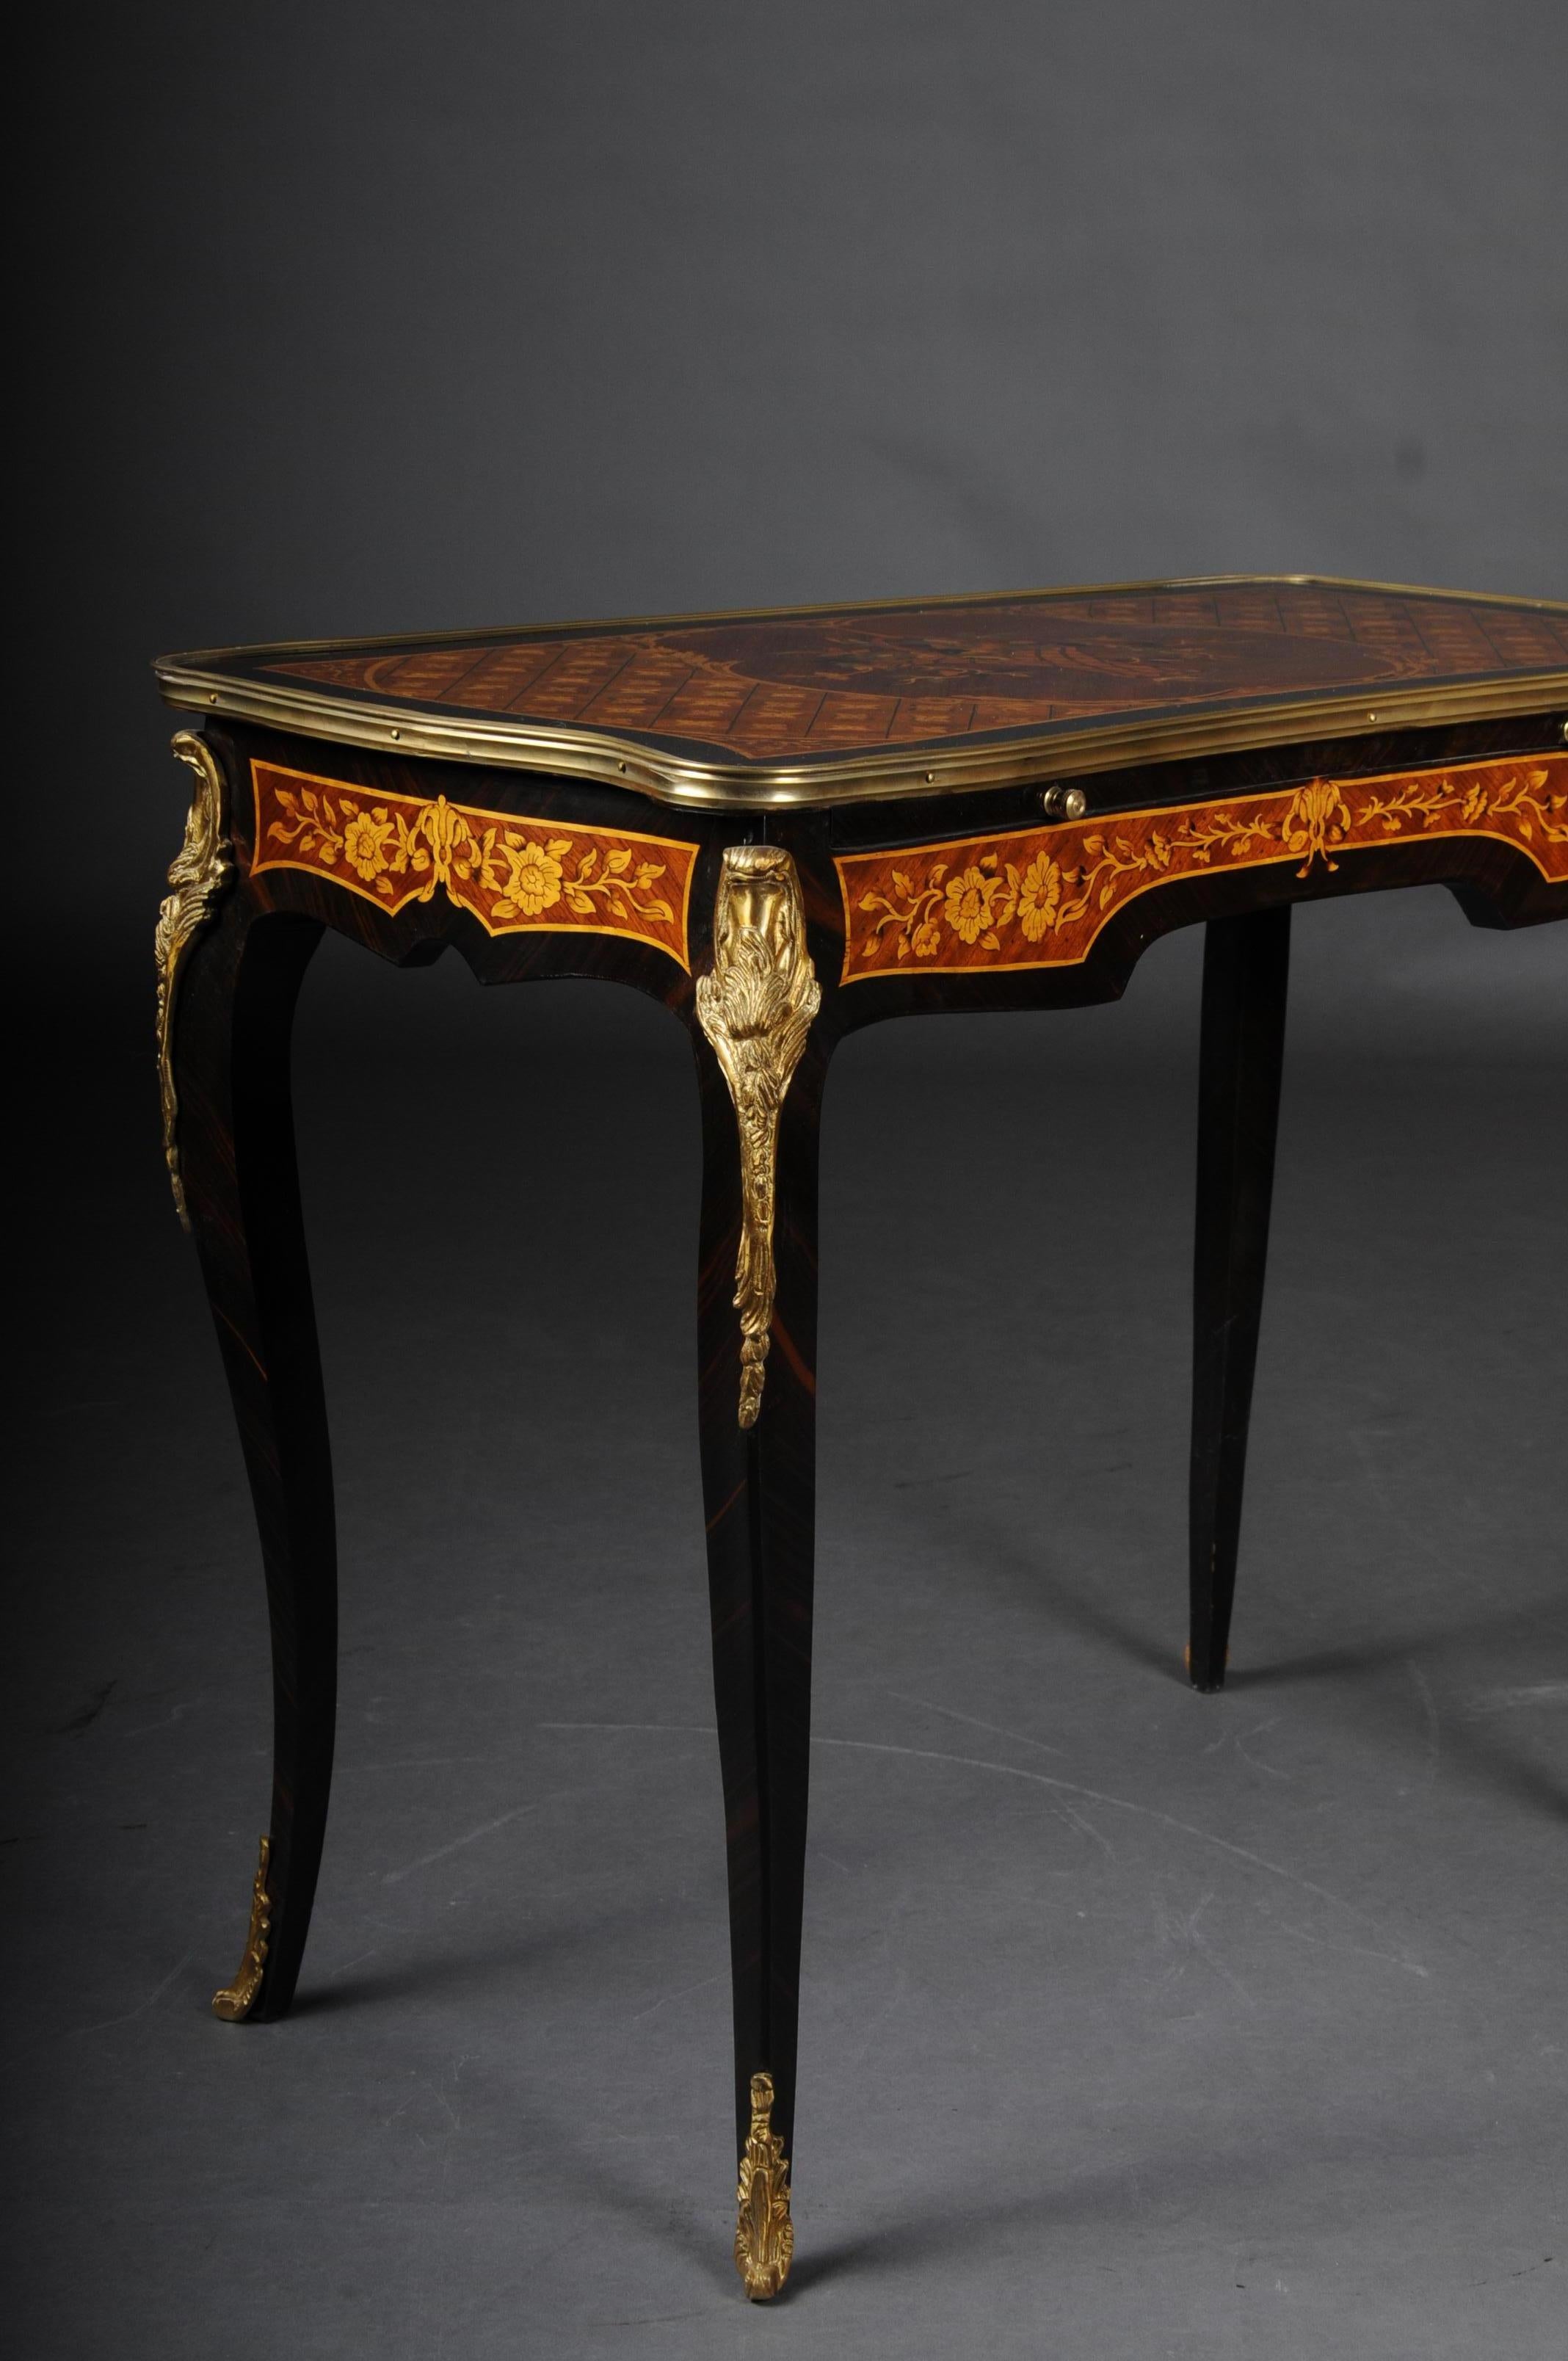 Wood Ladies Desk or Table in Louis Quinze Style For Sale